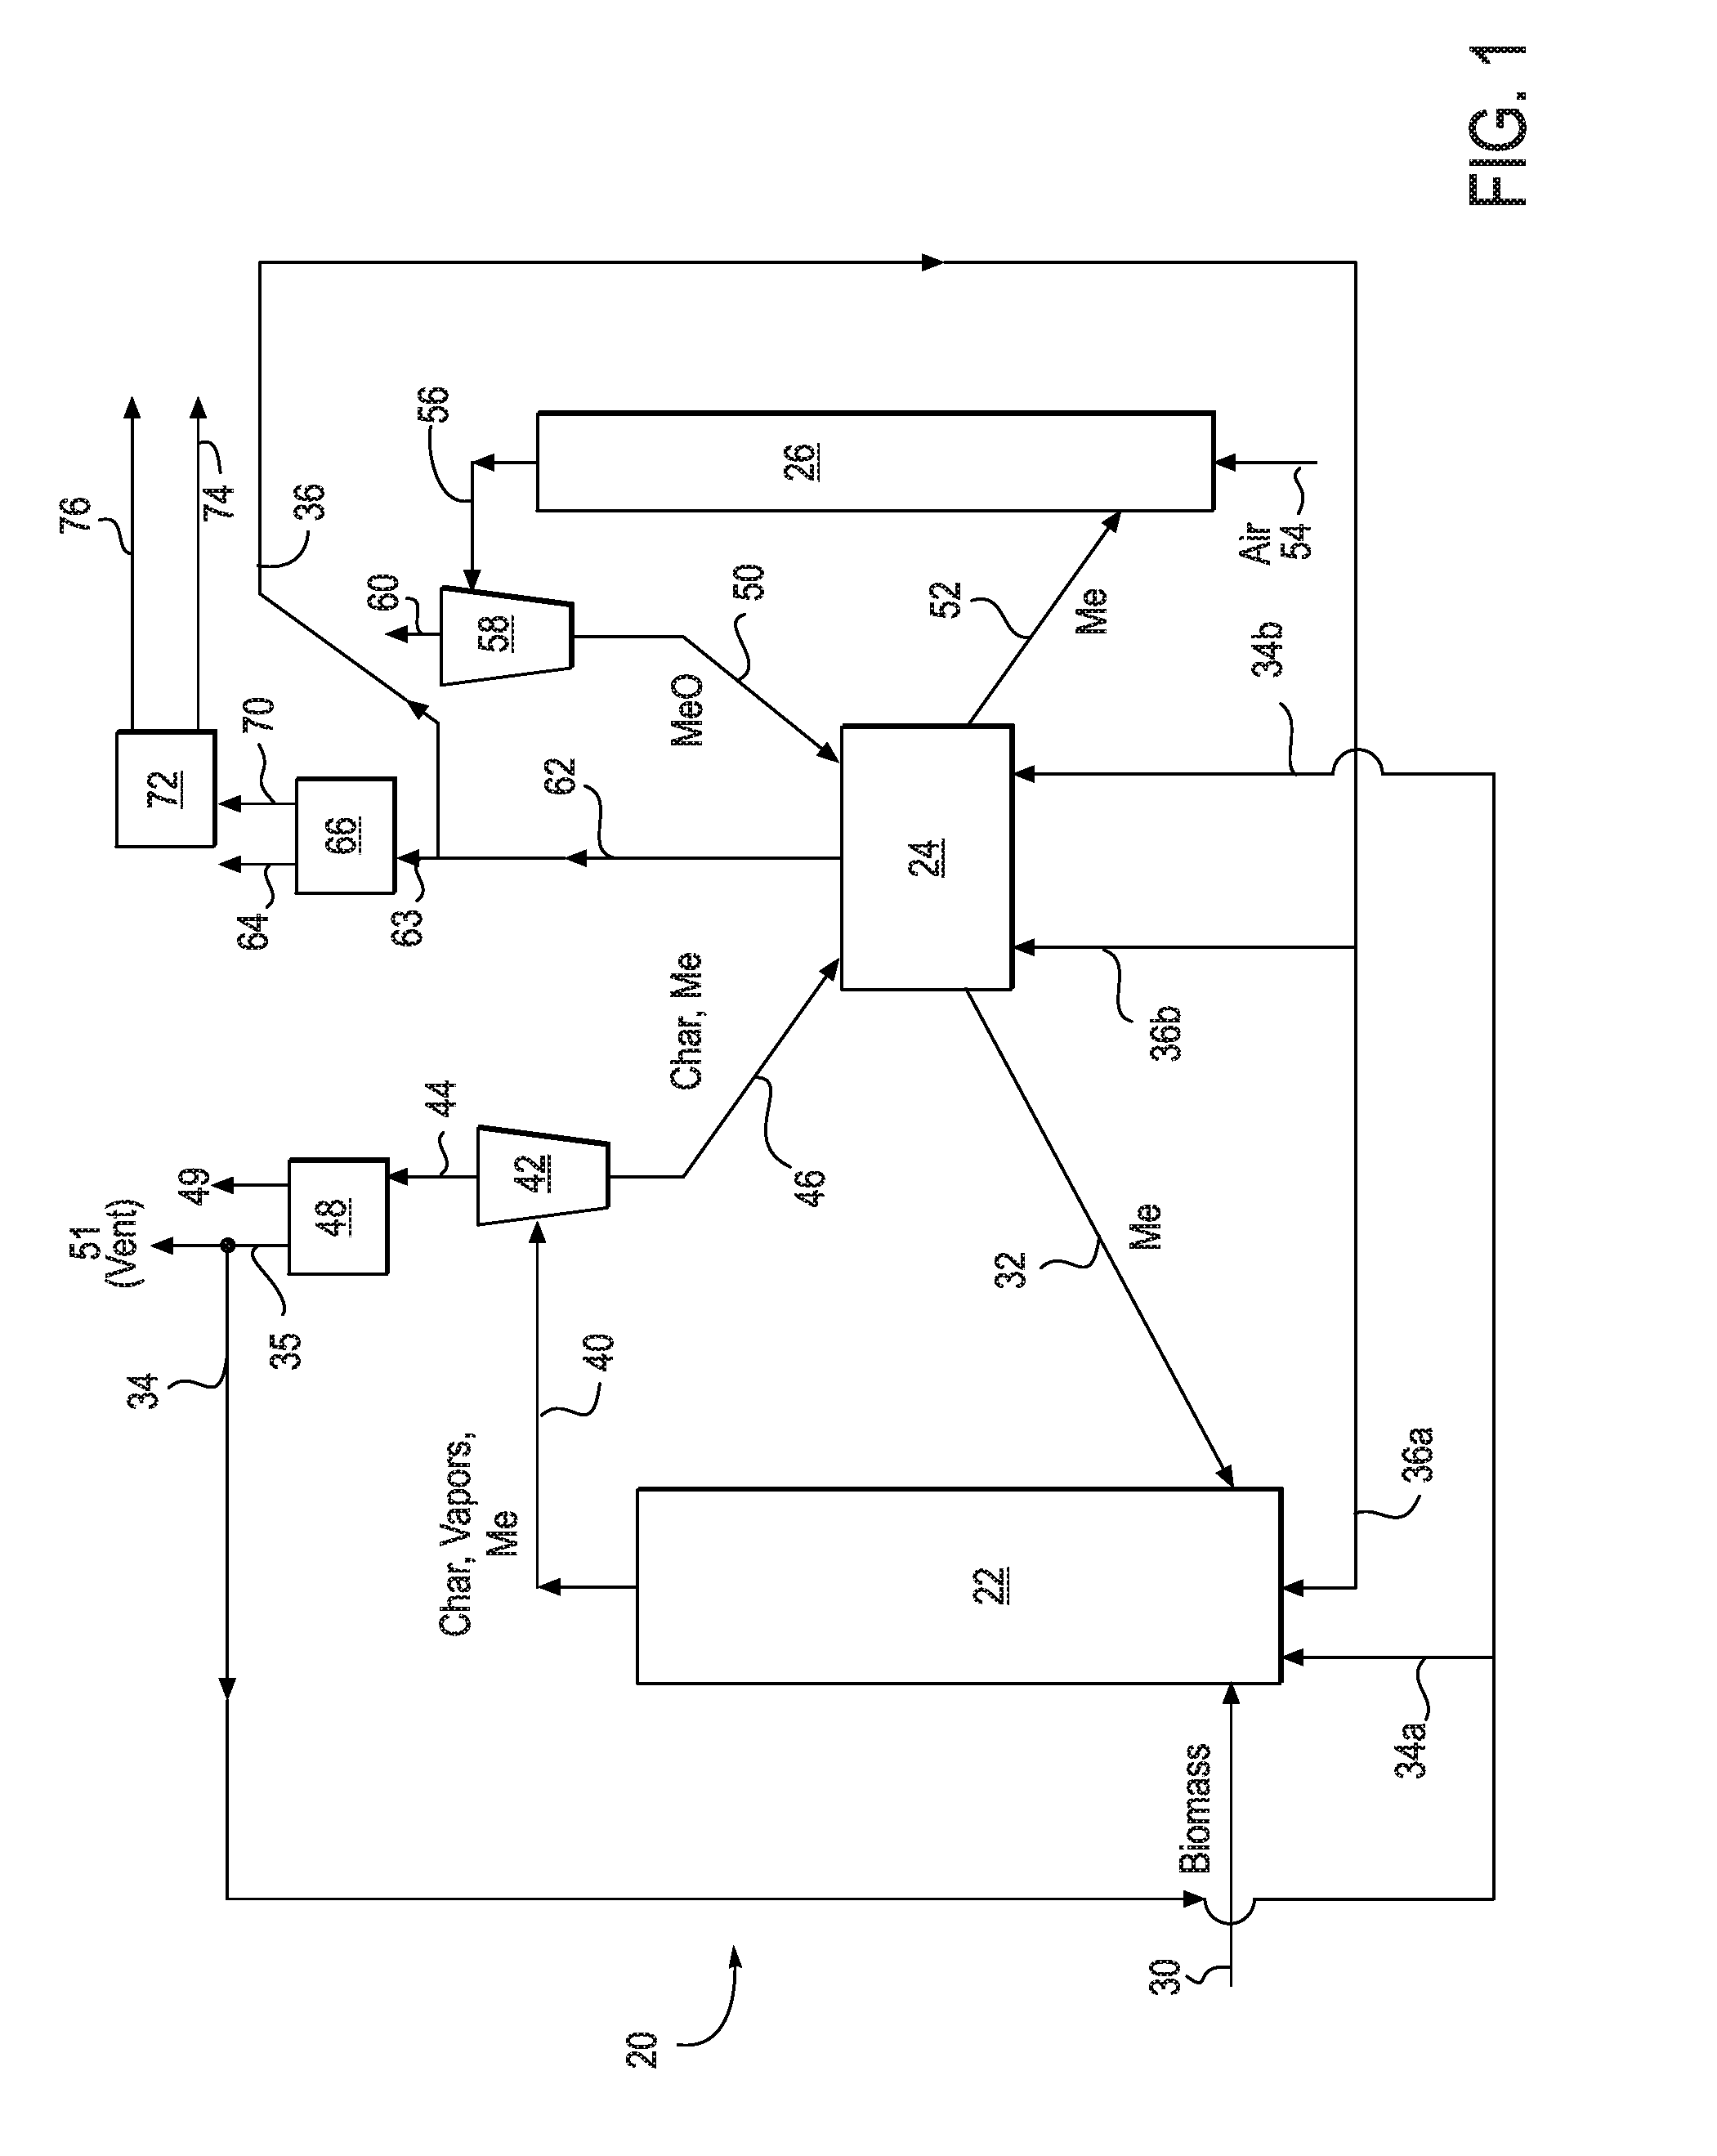 Method and system for capturing carbon dioxide from biomass pyrolysis process